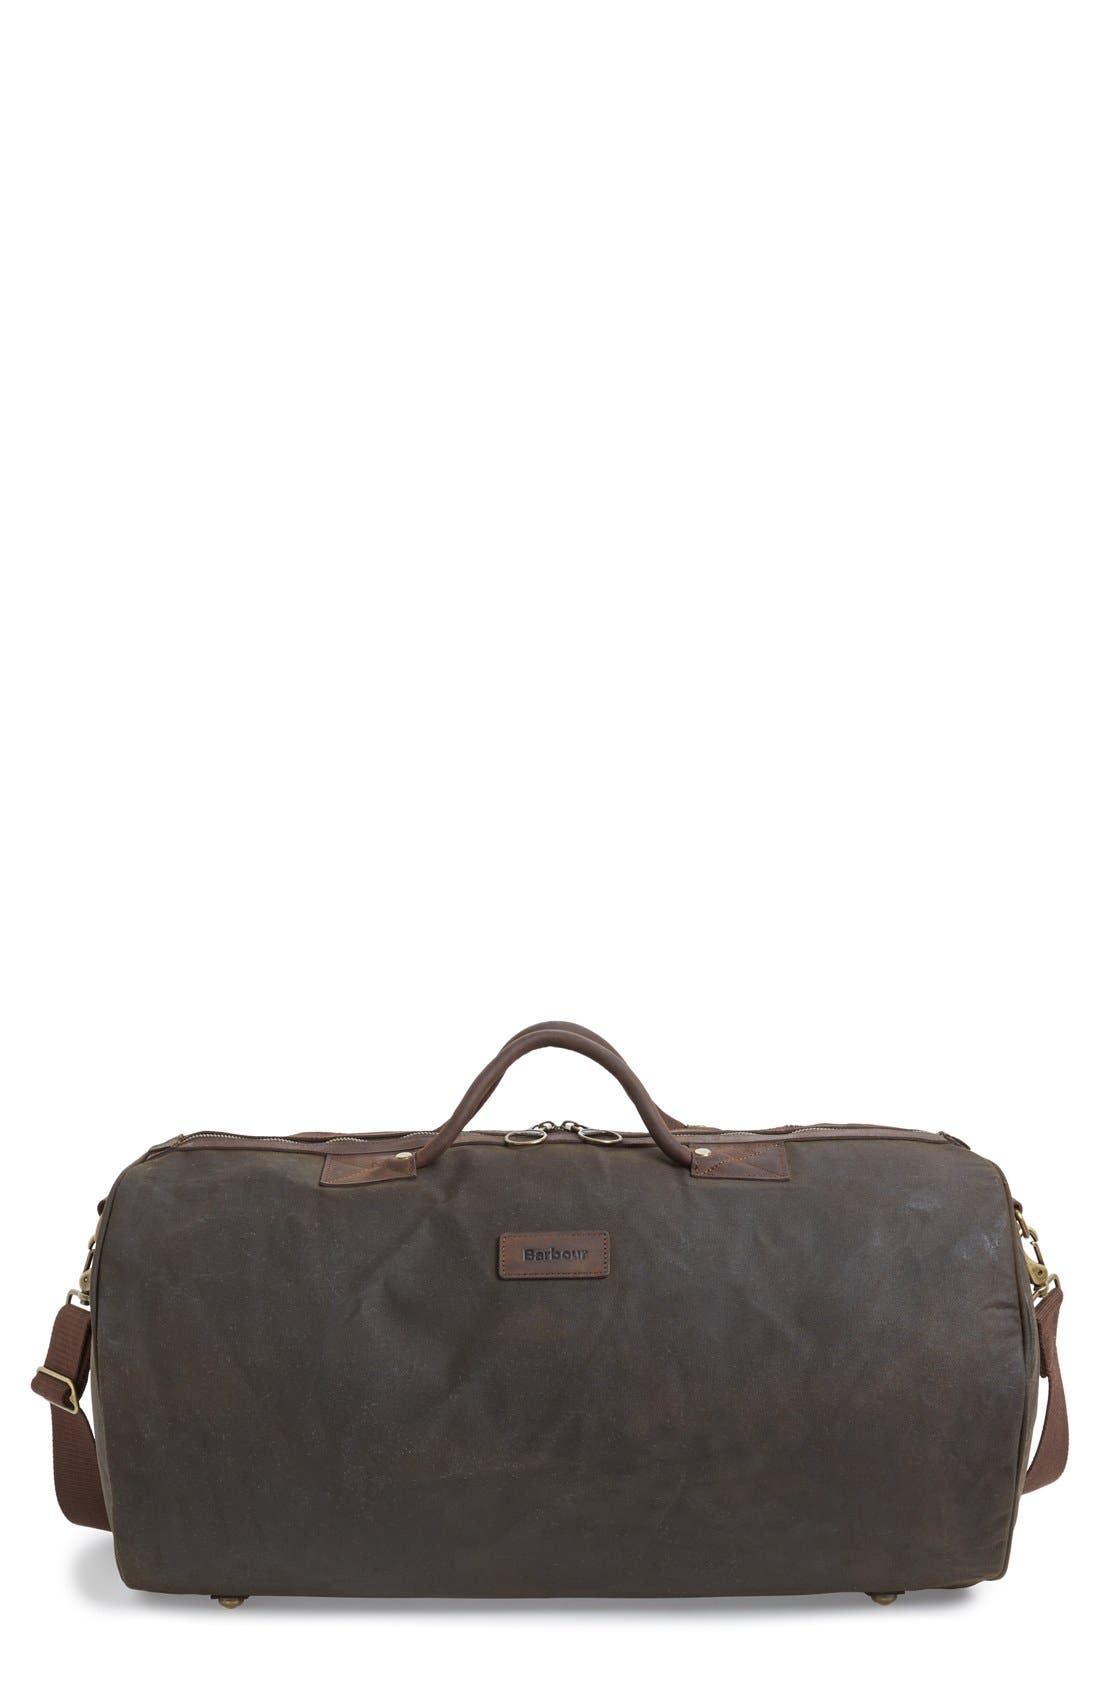 barbour luggage sale